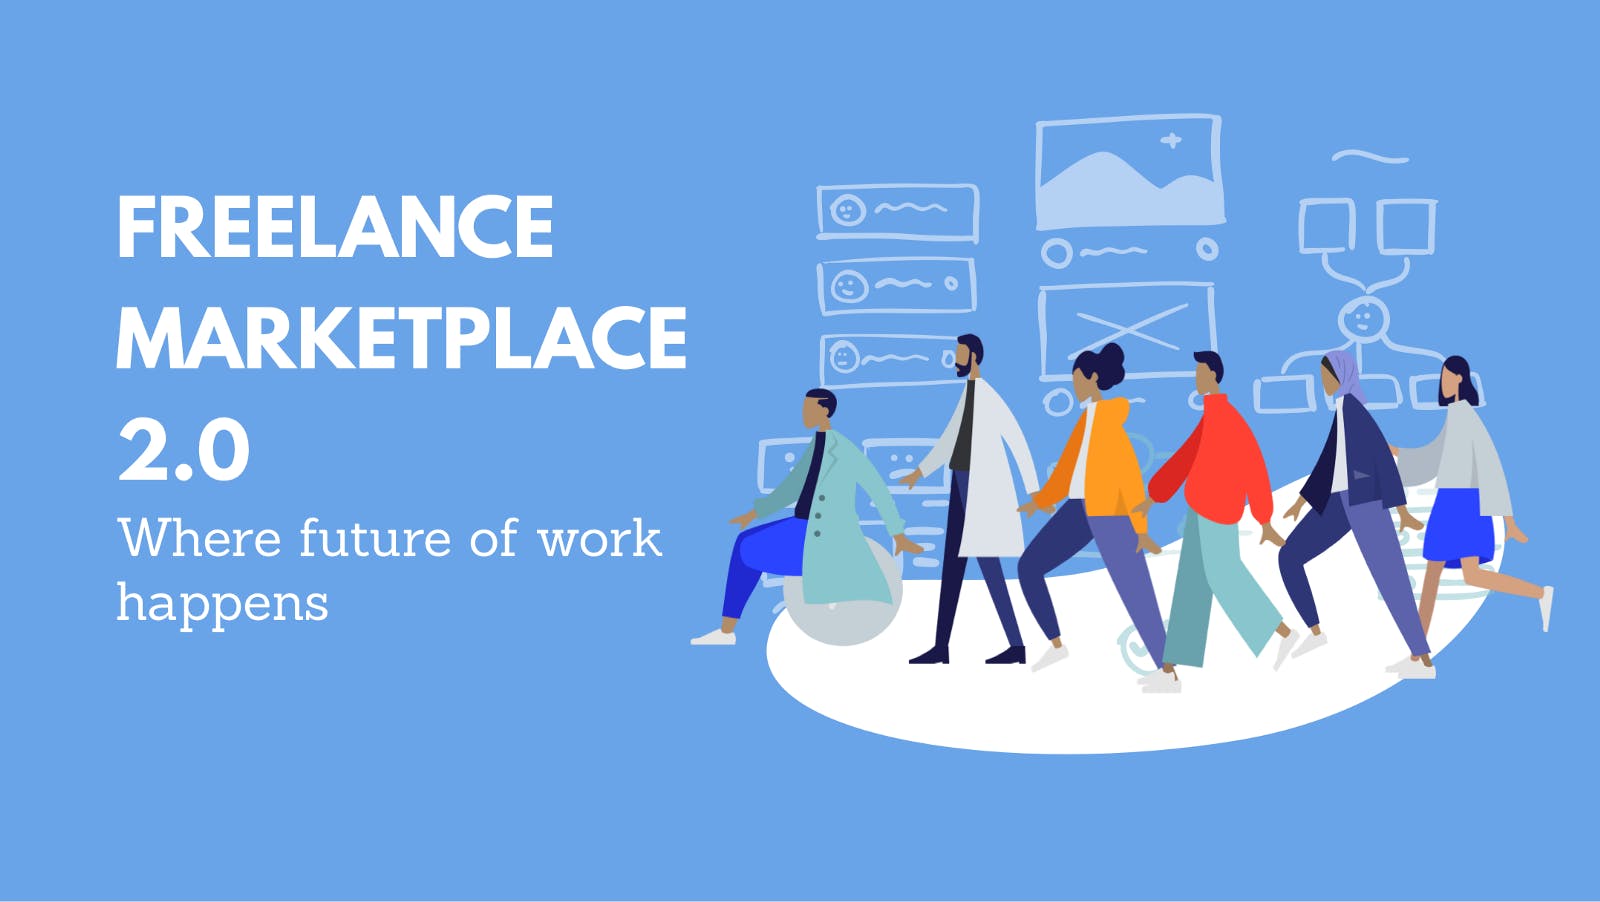 /freelance-marketplace-2-0-where-future-of-work-happens-1a92ada76725 feature image